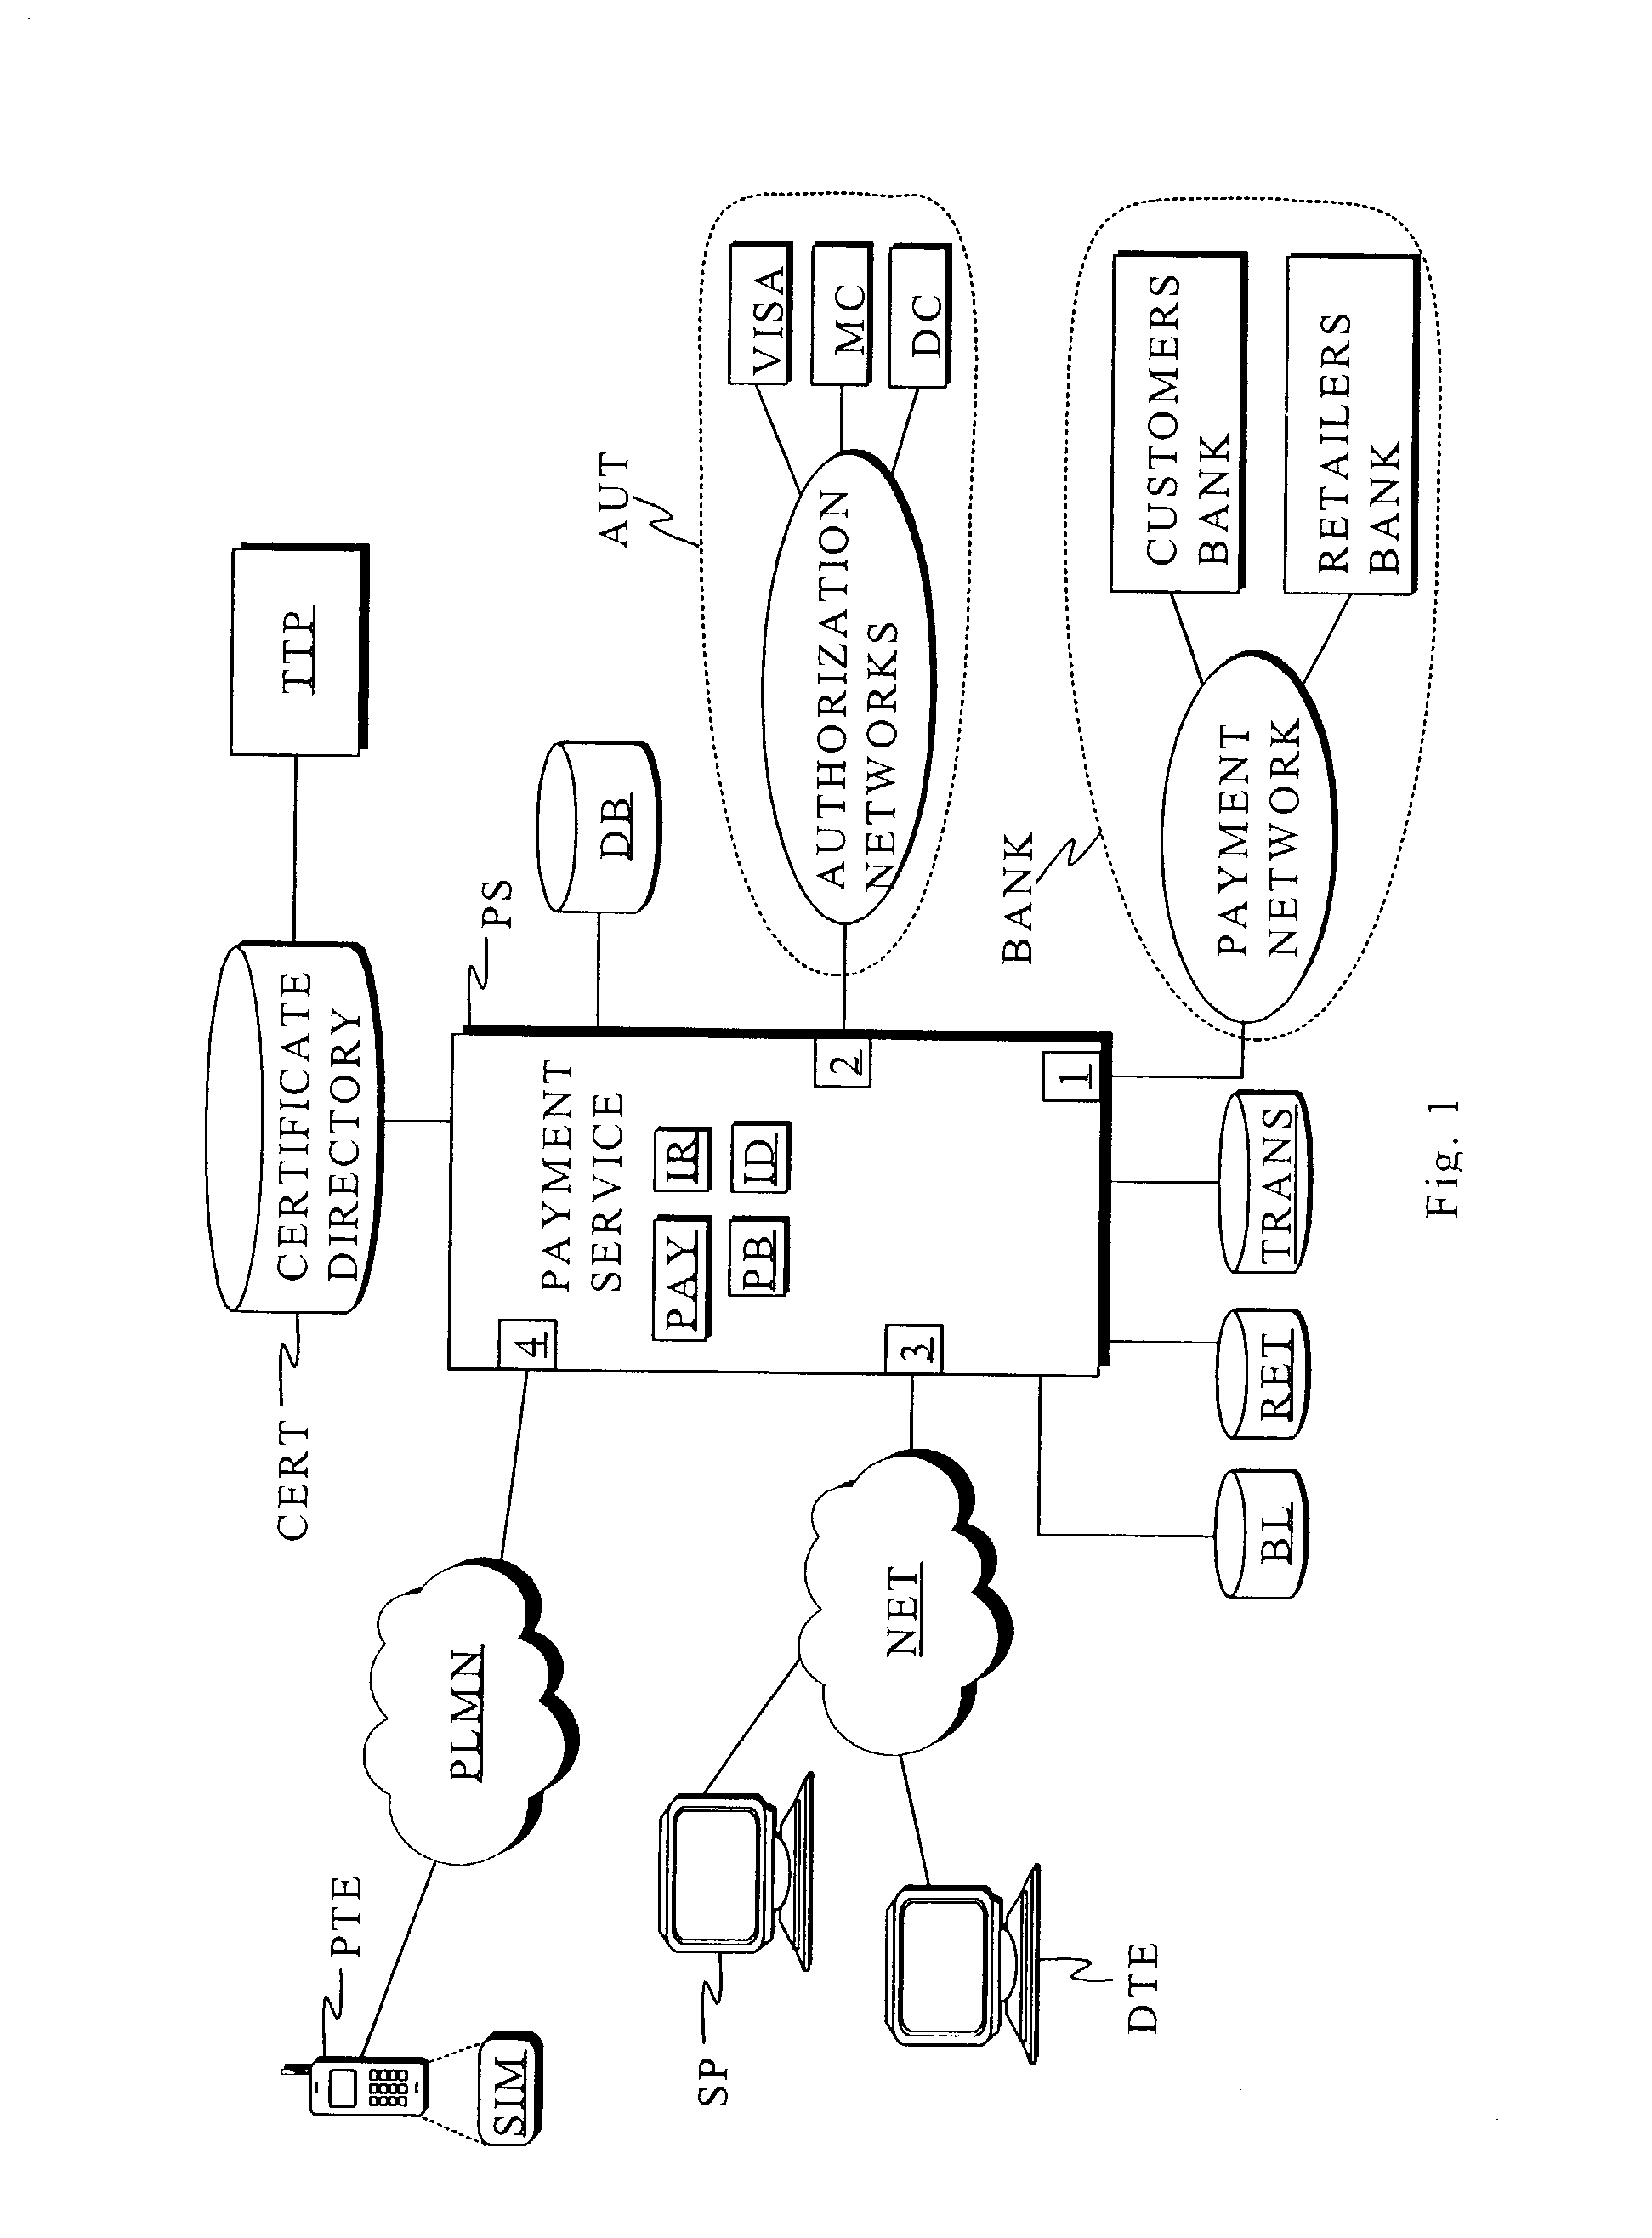 System and method for effecting secure online payment using a client payment card